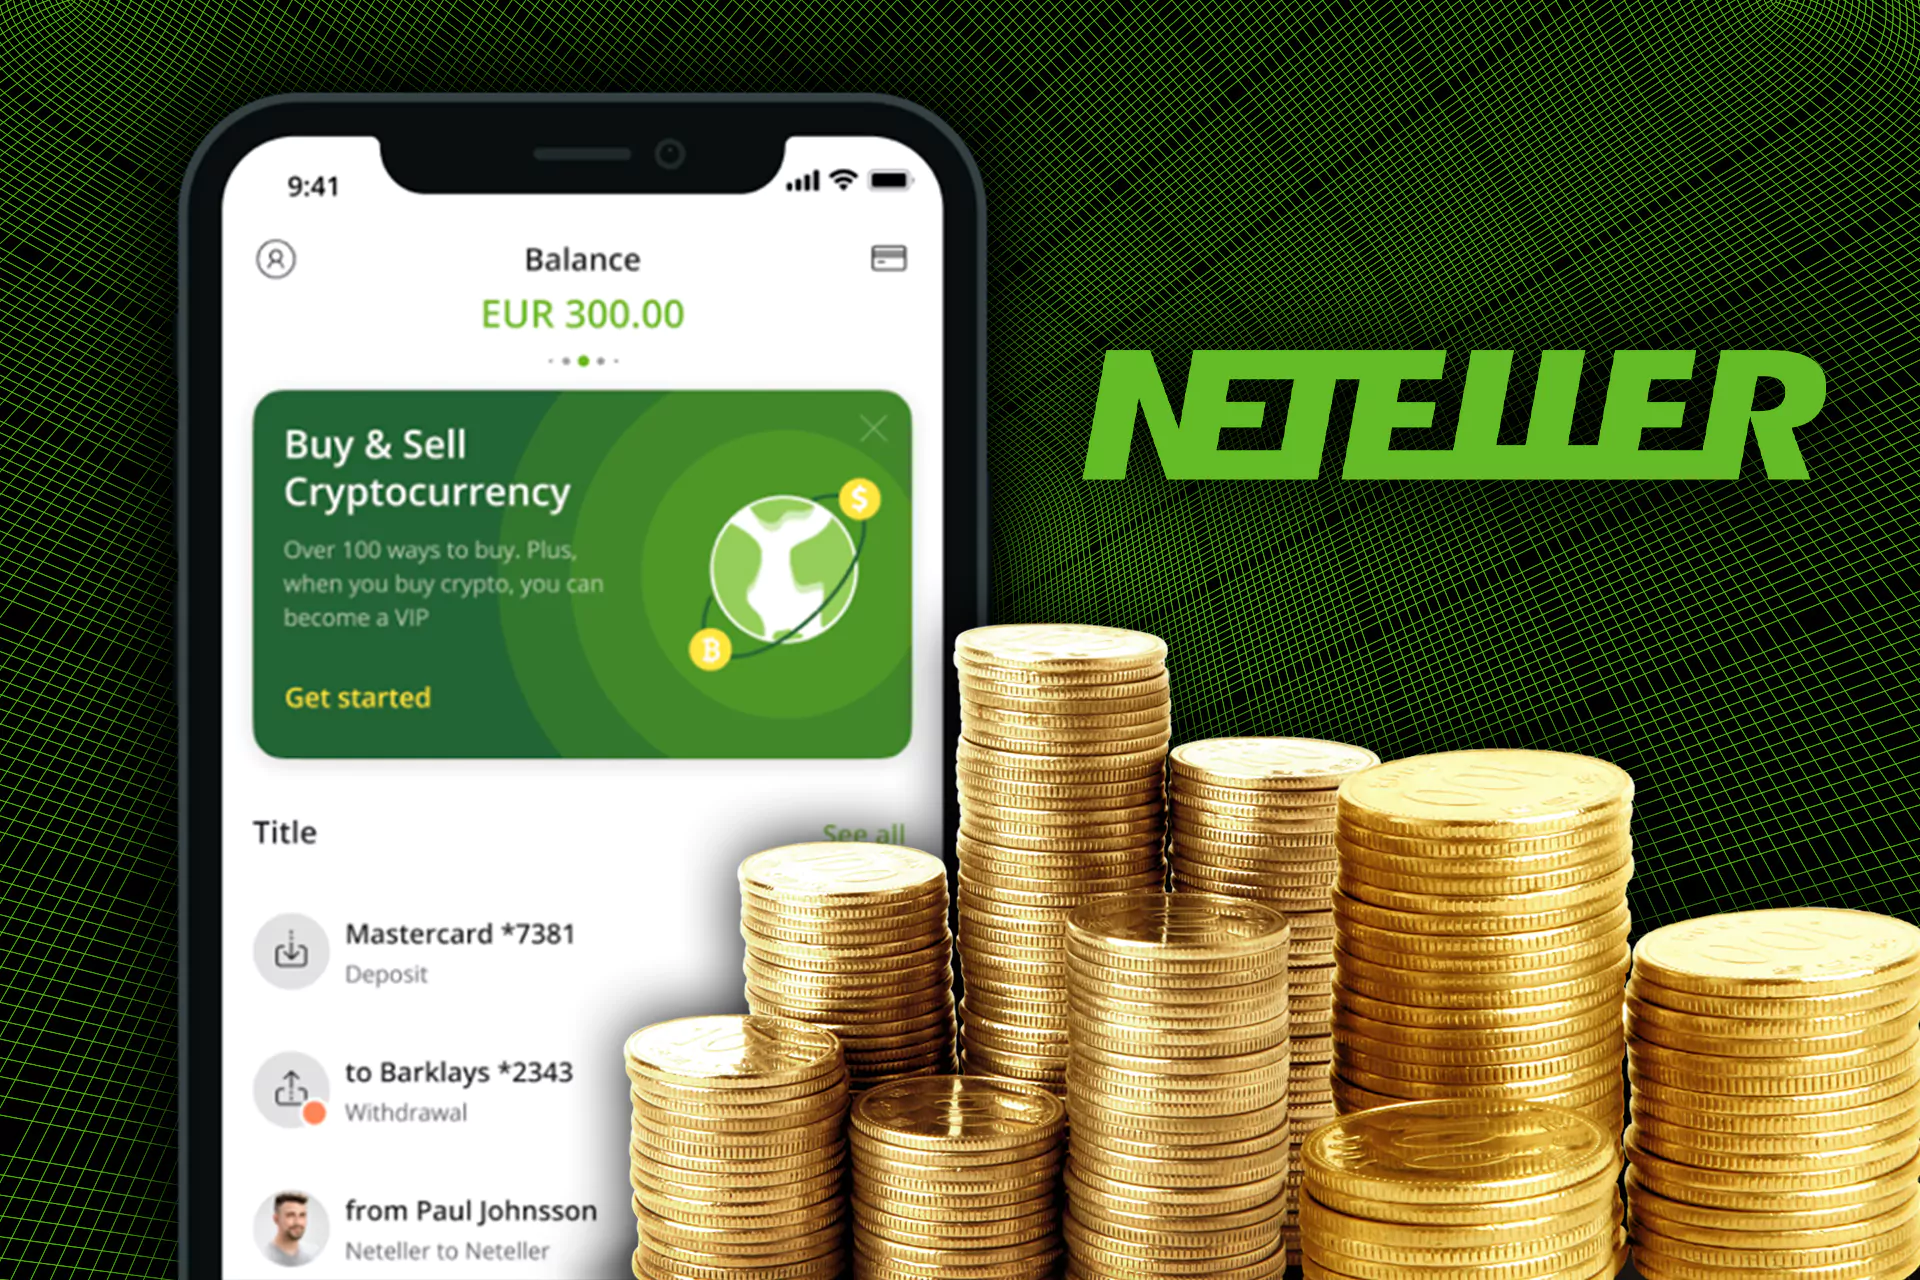 Neteller is a second popular e-wallet in the world.